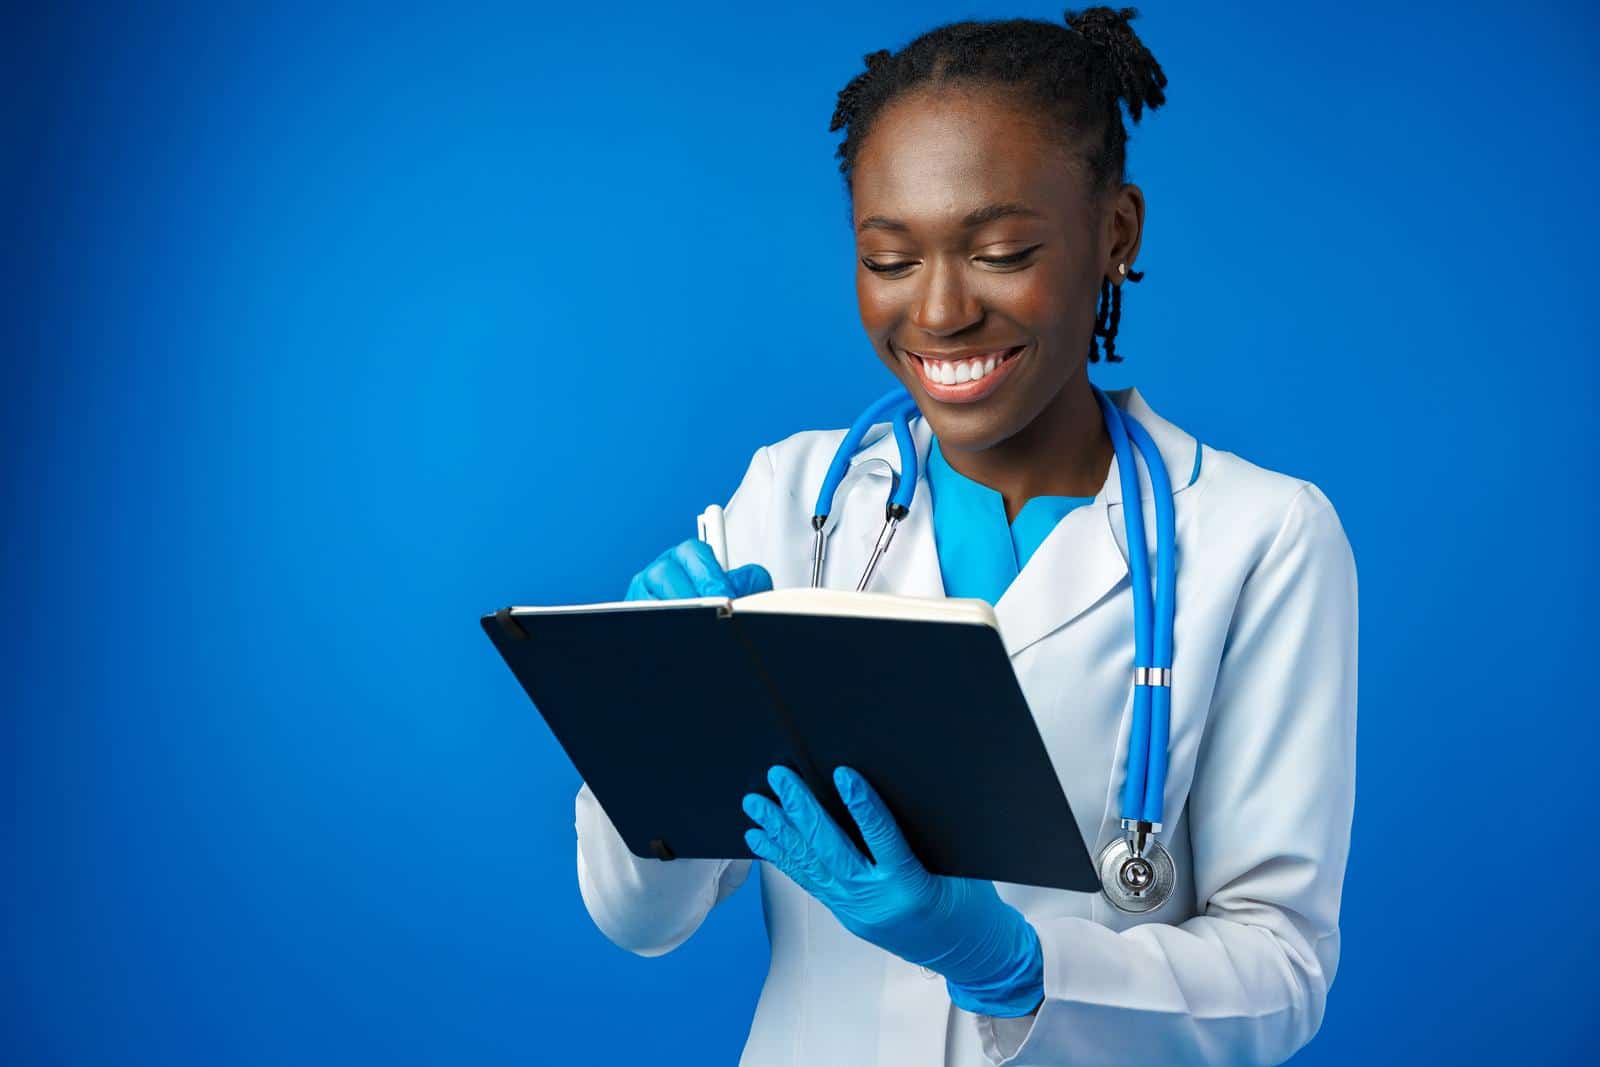 Black female doctor student wearing a lab coat with book